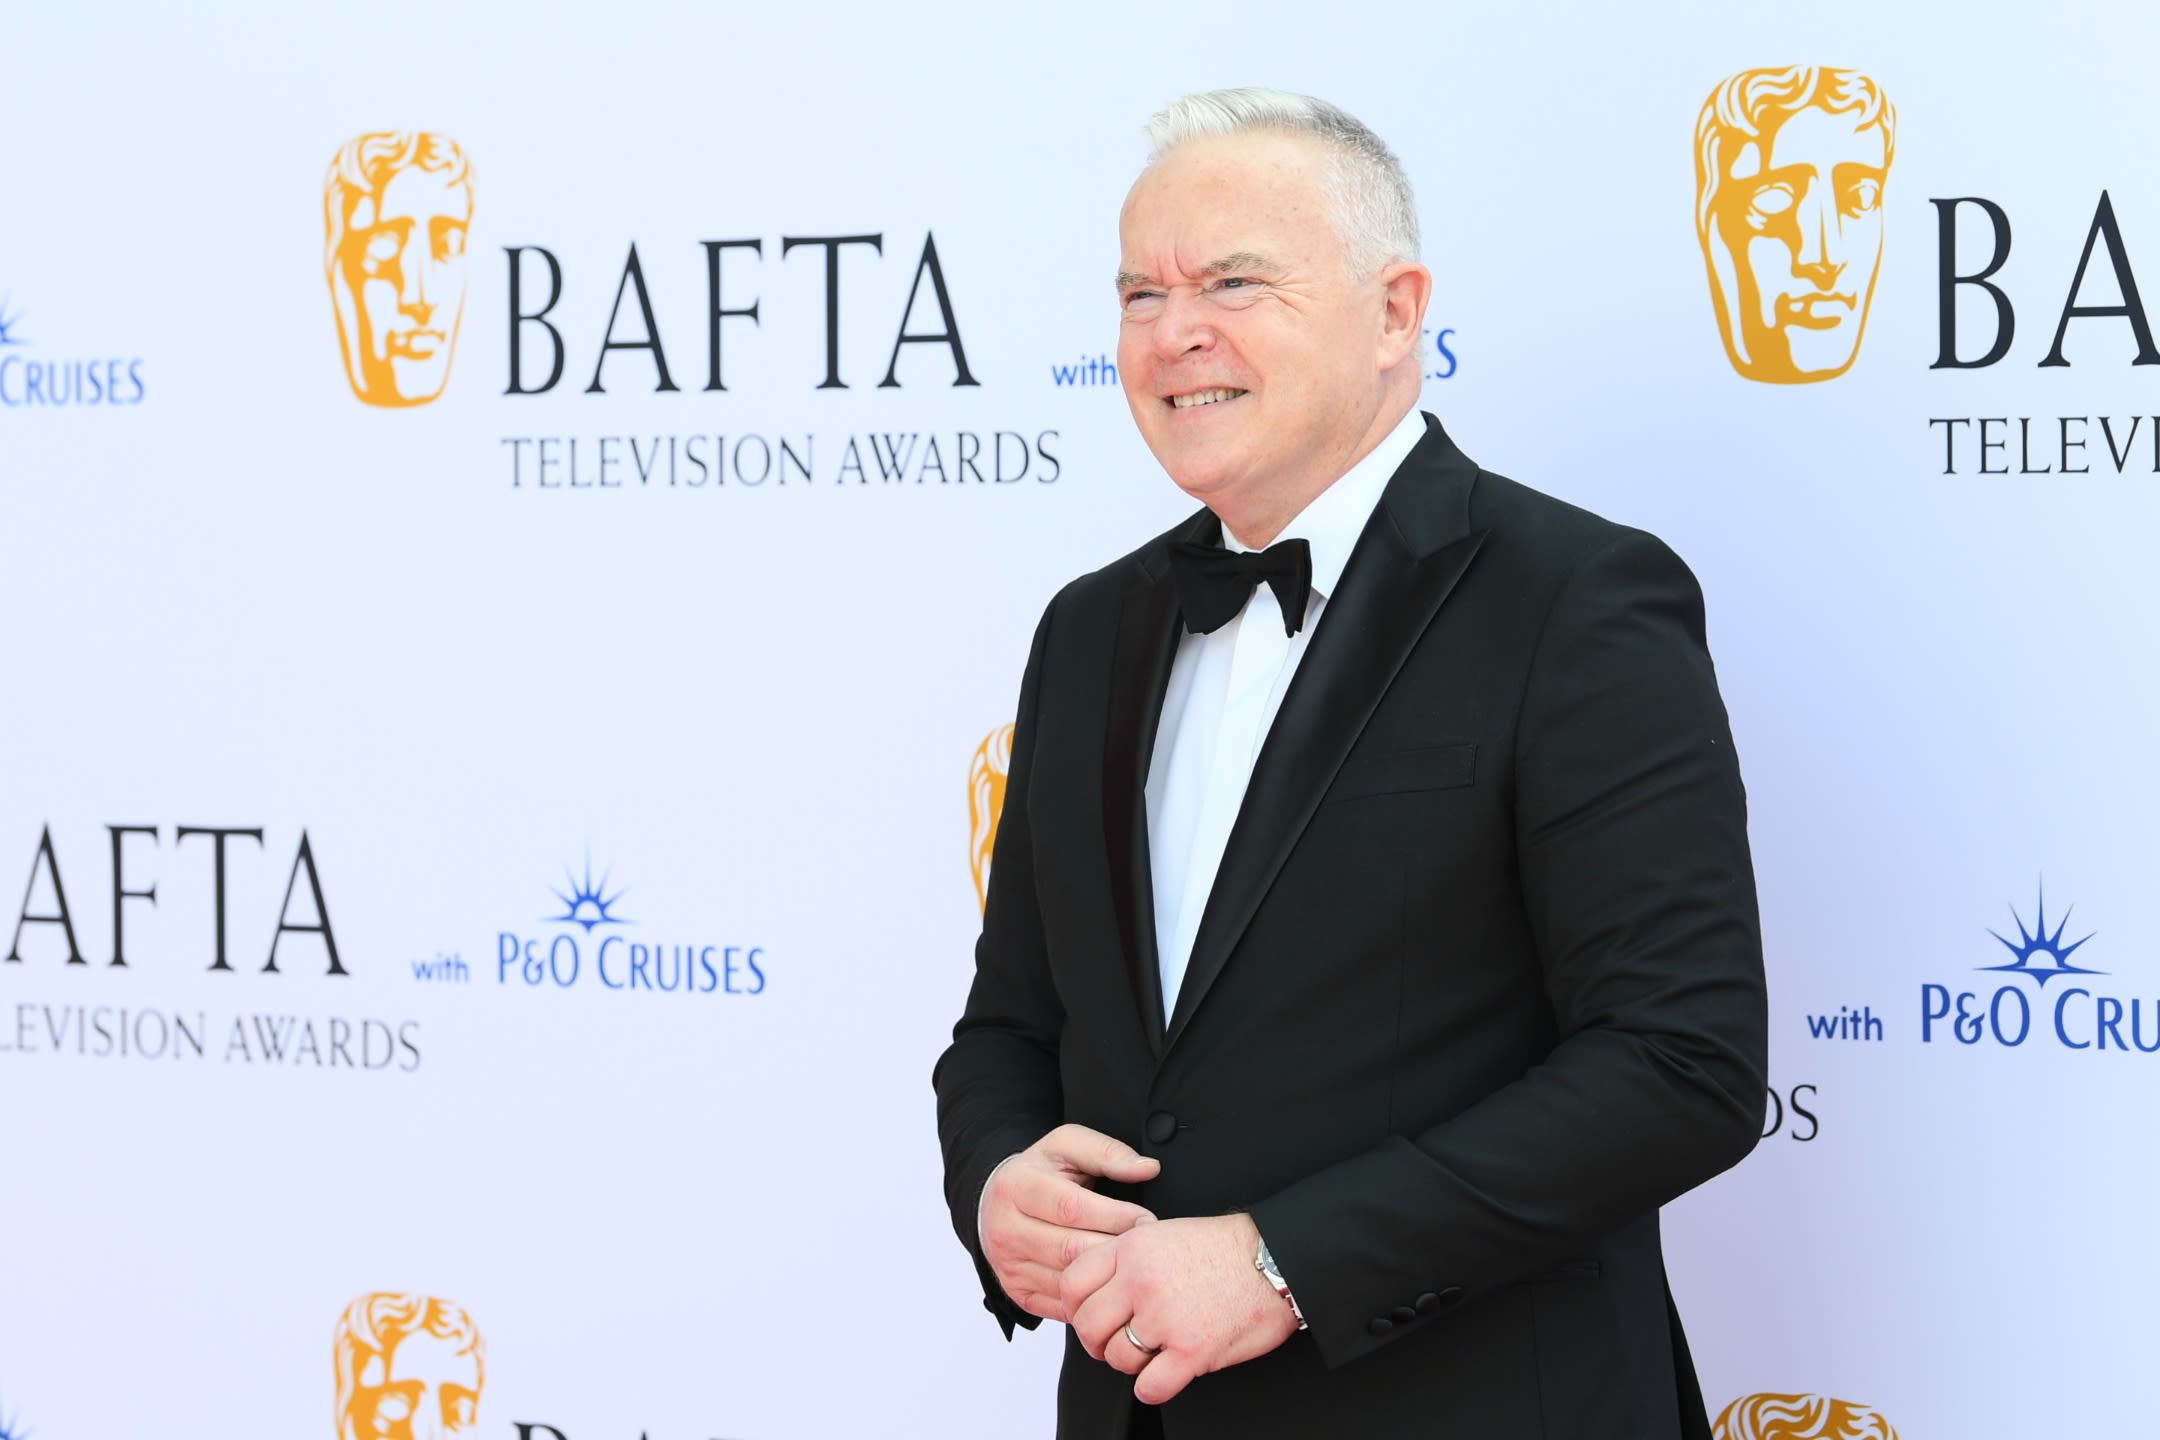 Huw Edwards: How the U.K.’s Top News Anchor Went From BBC Superstardom to Facing Prison